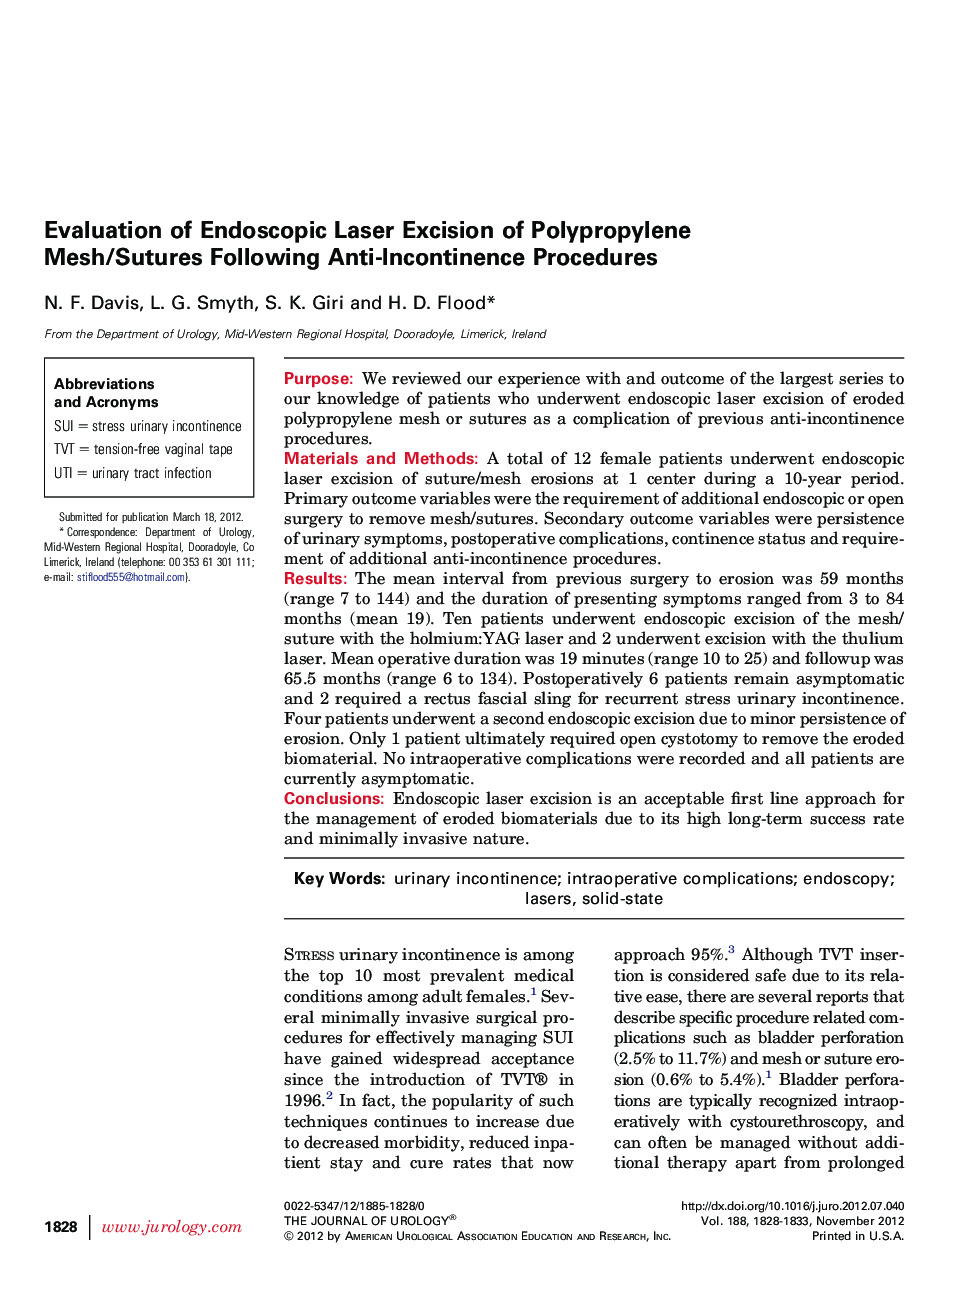 Evaluation of Endoscopic Laser Excision of Polypropylene Mesh/Sutures Following Anti-Incontinence Procedures